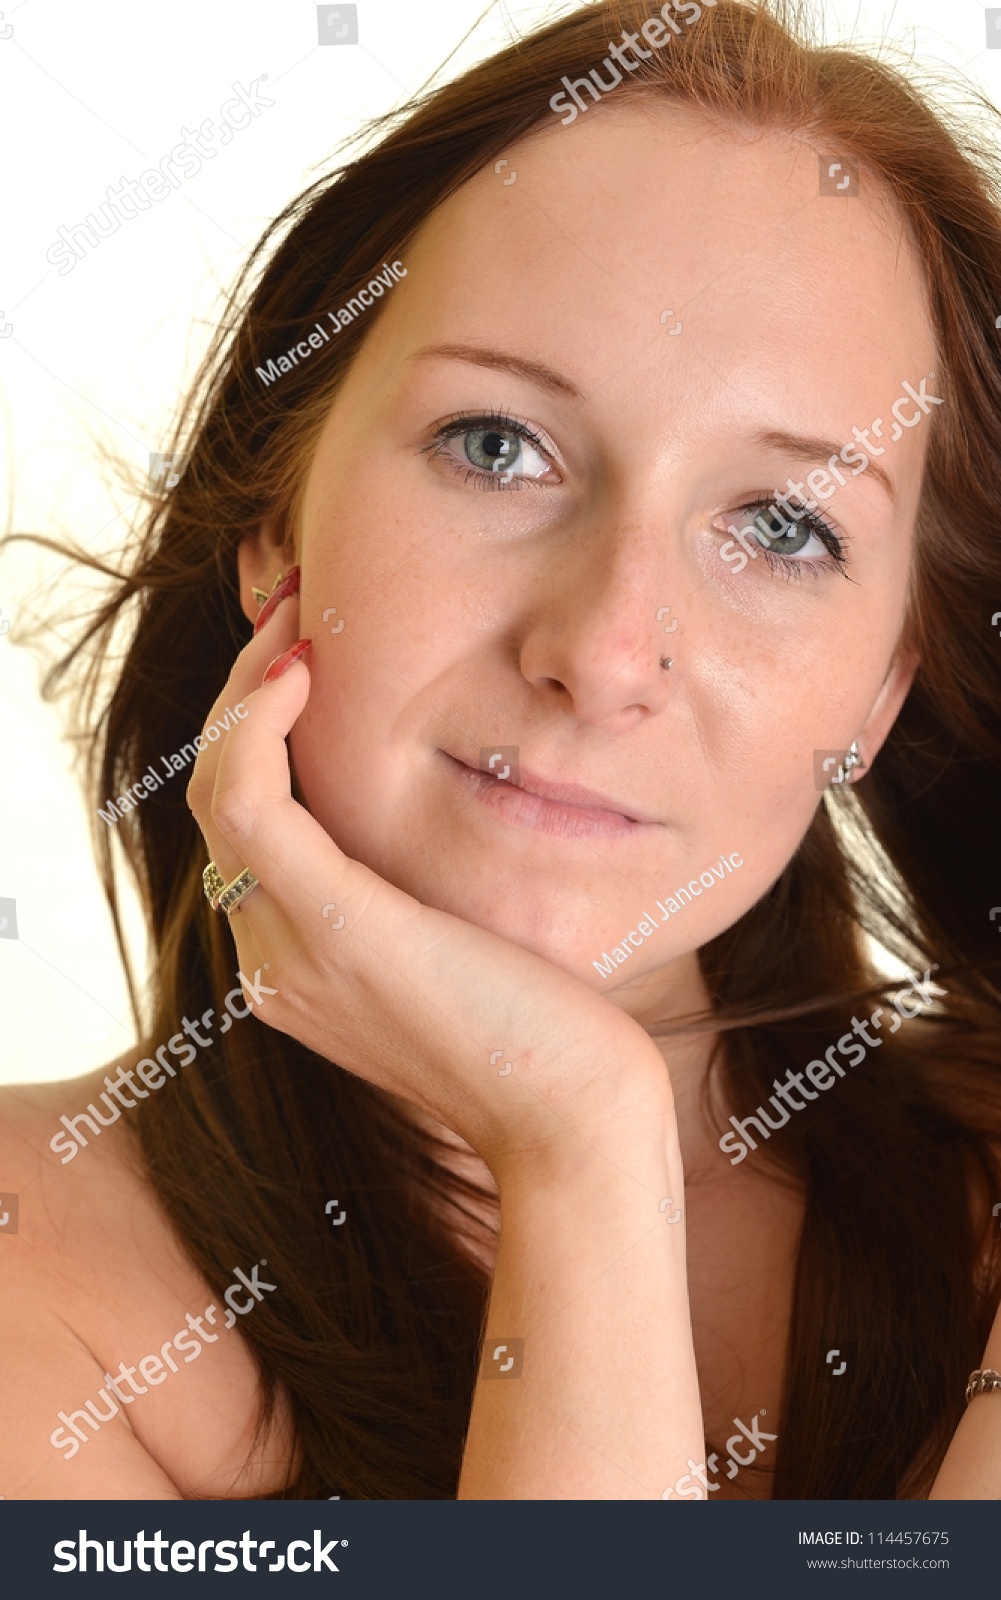 Portrait Of Young Woman Against A White Background Stock Photo ...